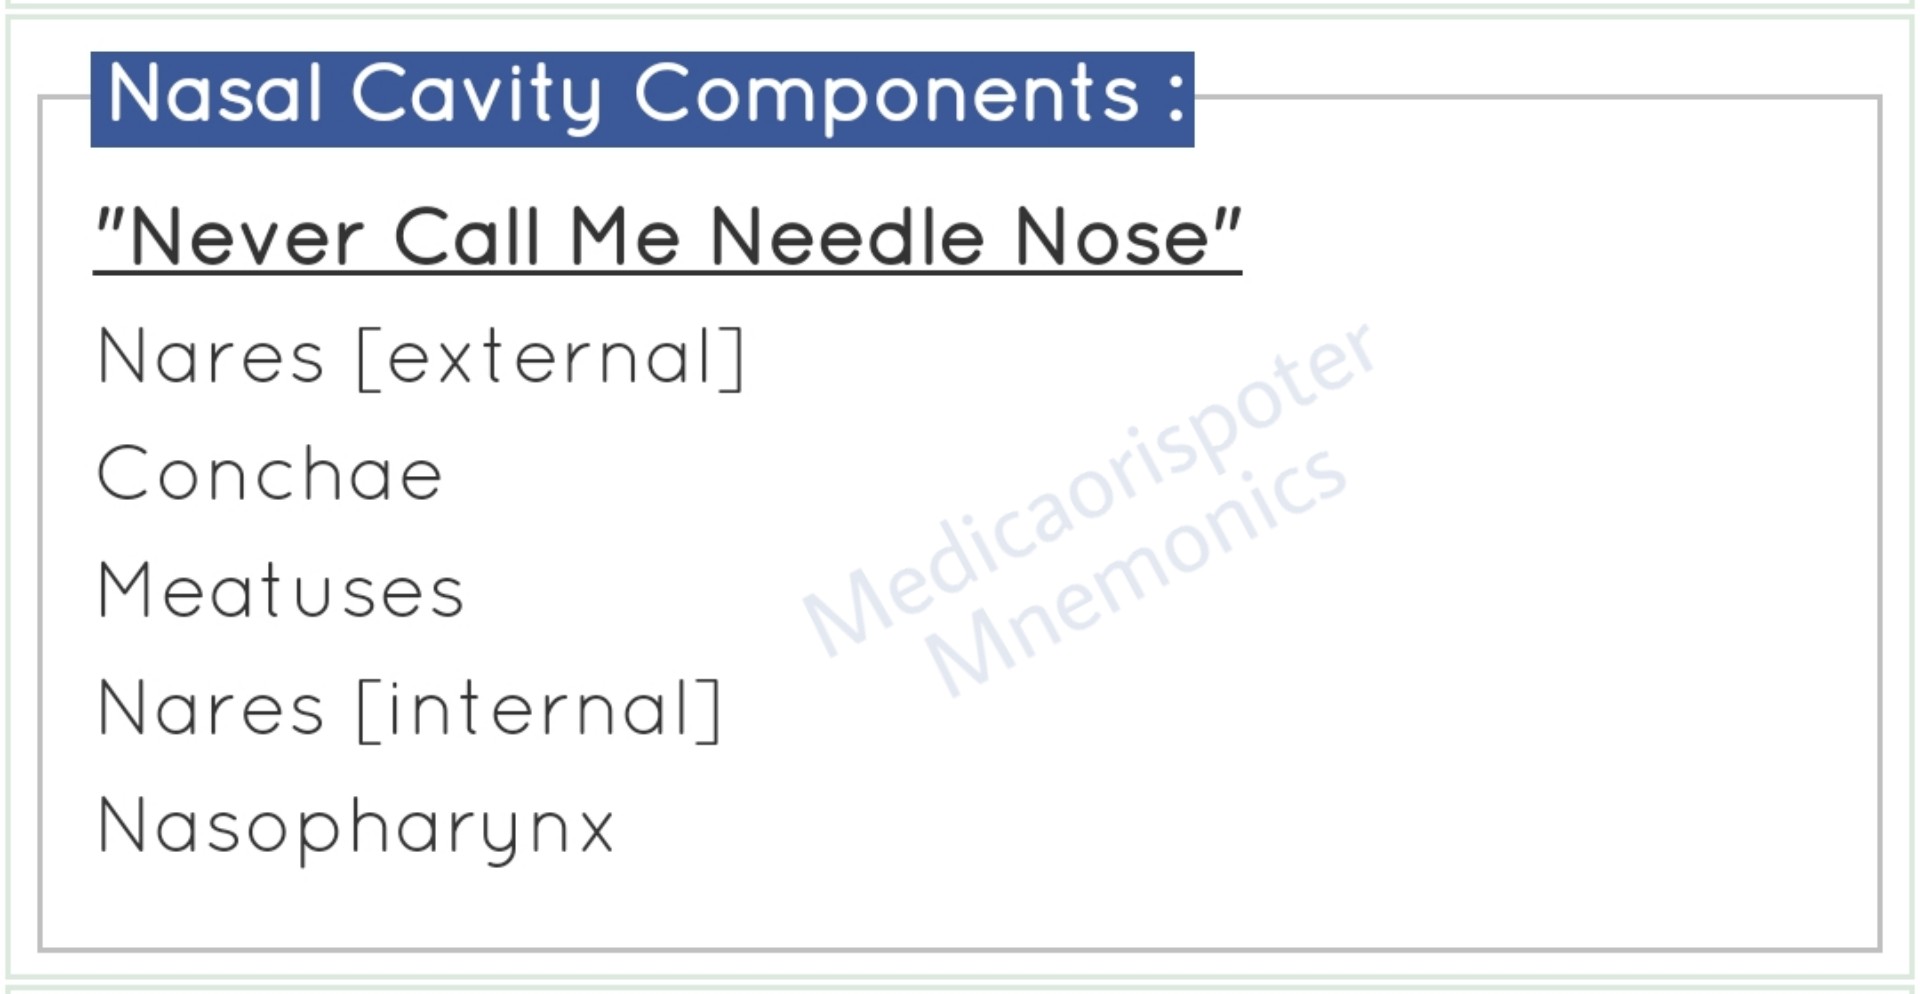 Components_of_Nasal_Cavity